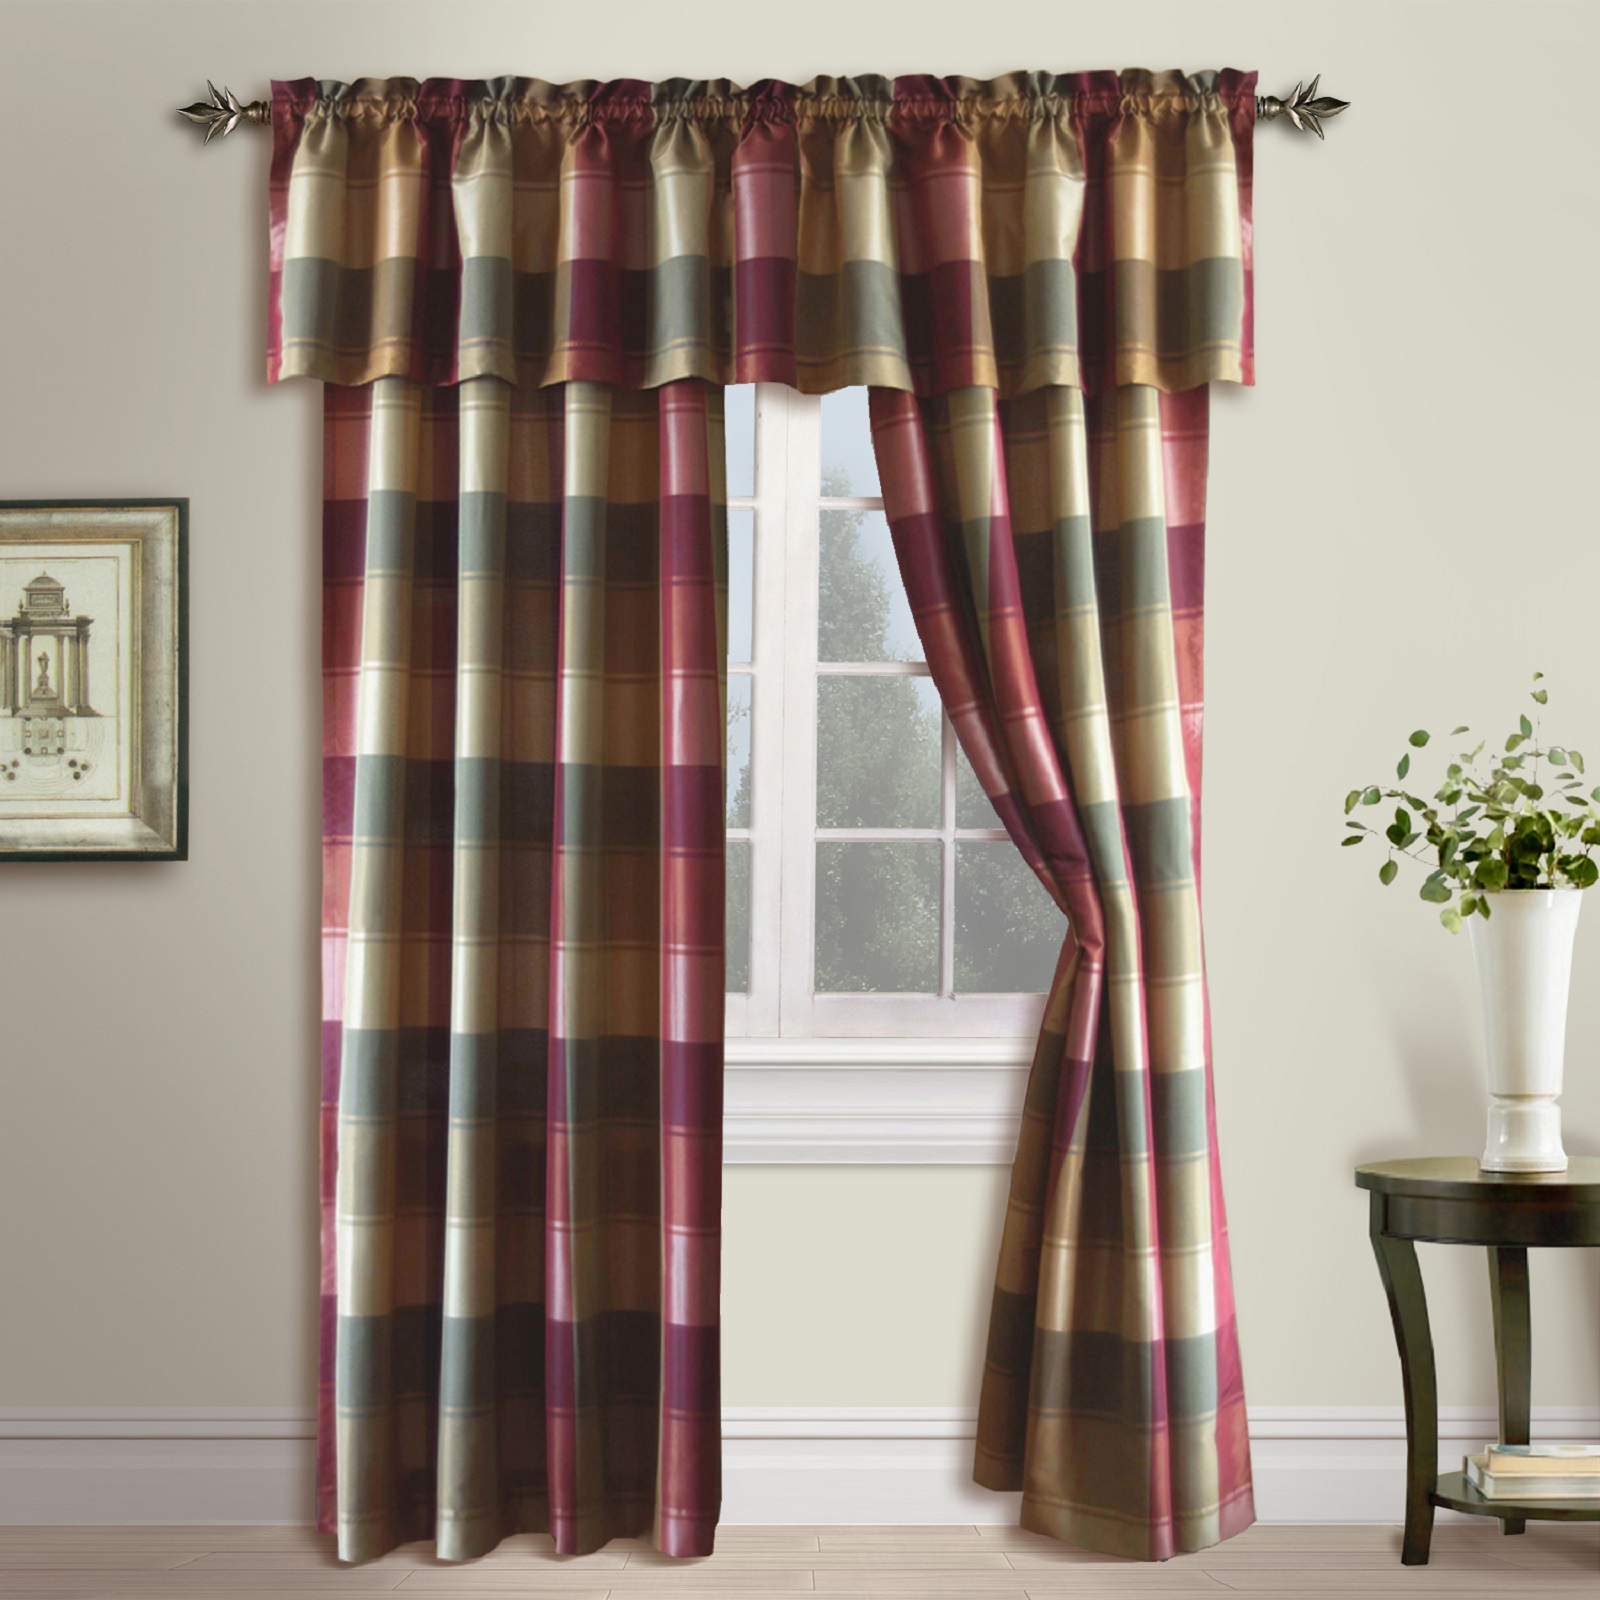 United Curtain Company Plaid trendy but tailored polyester panel in blue/green, taupe/brown & burgundy